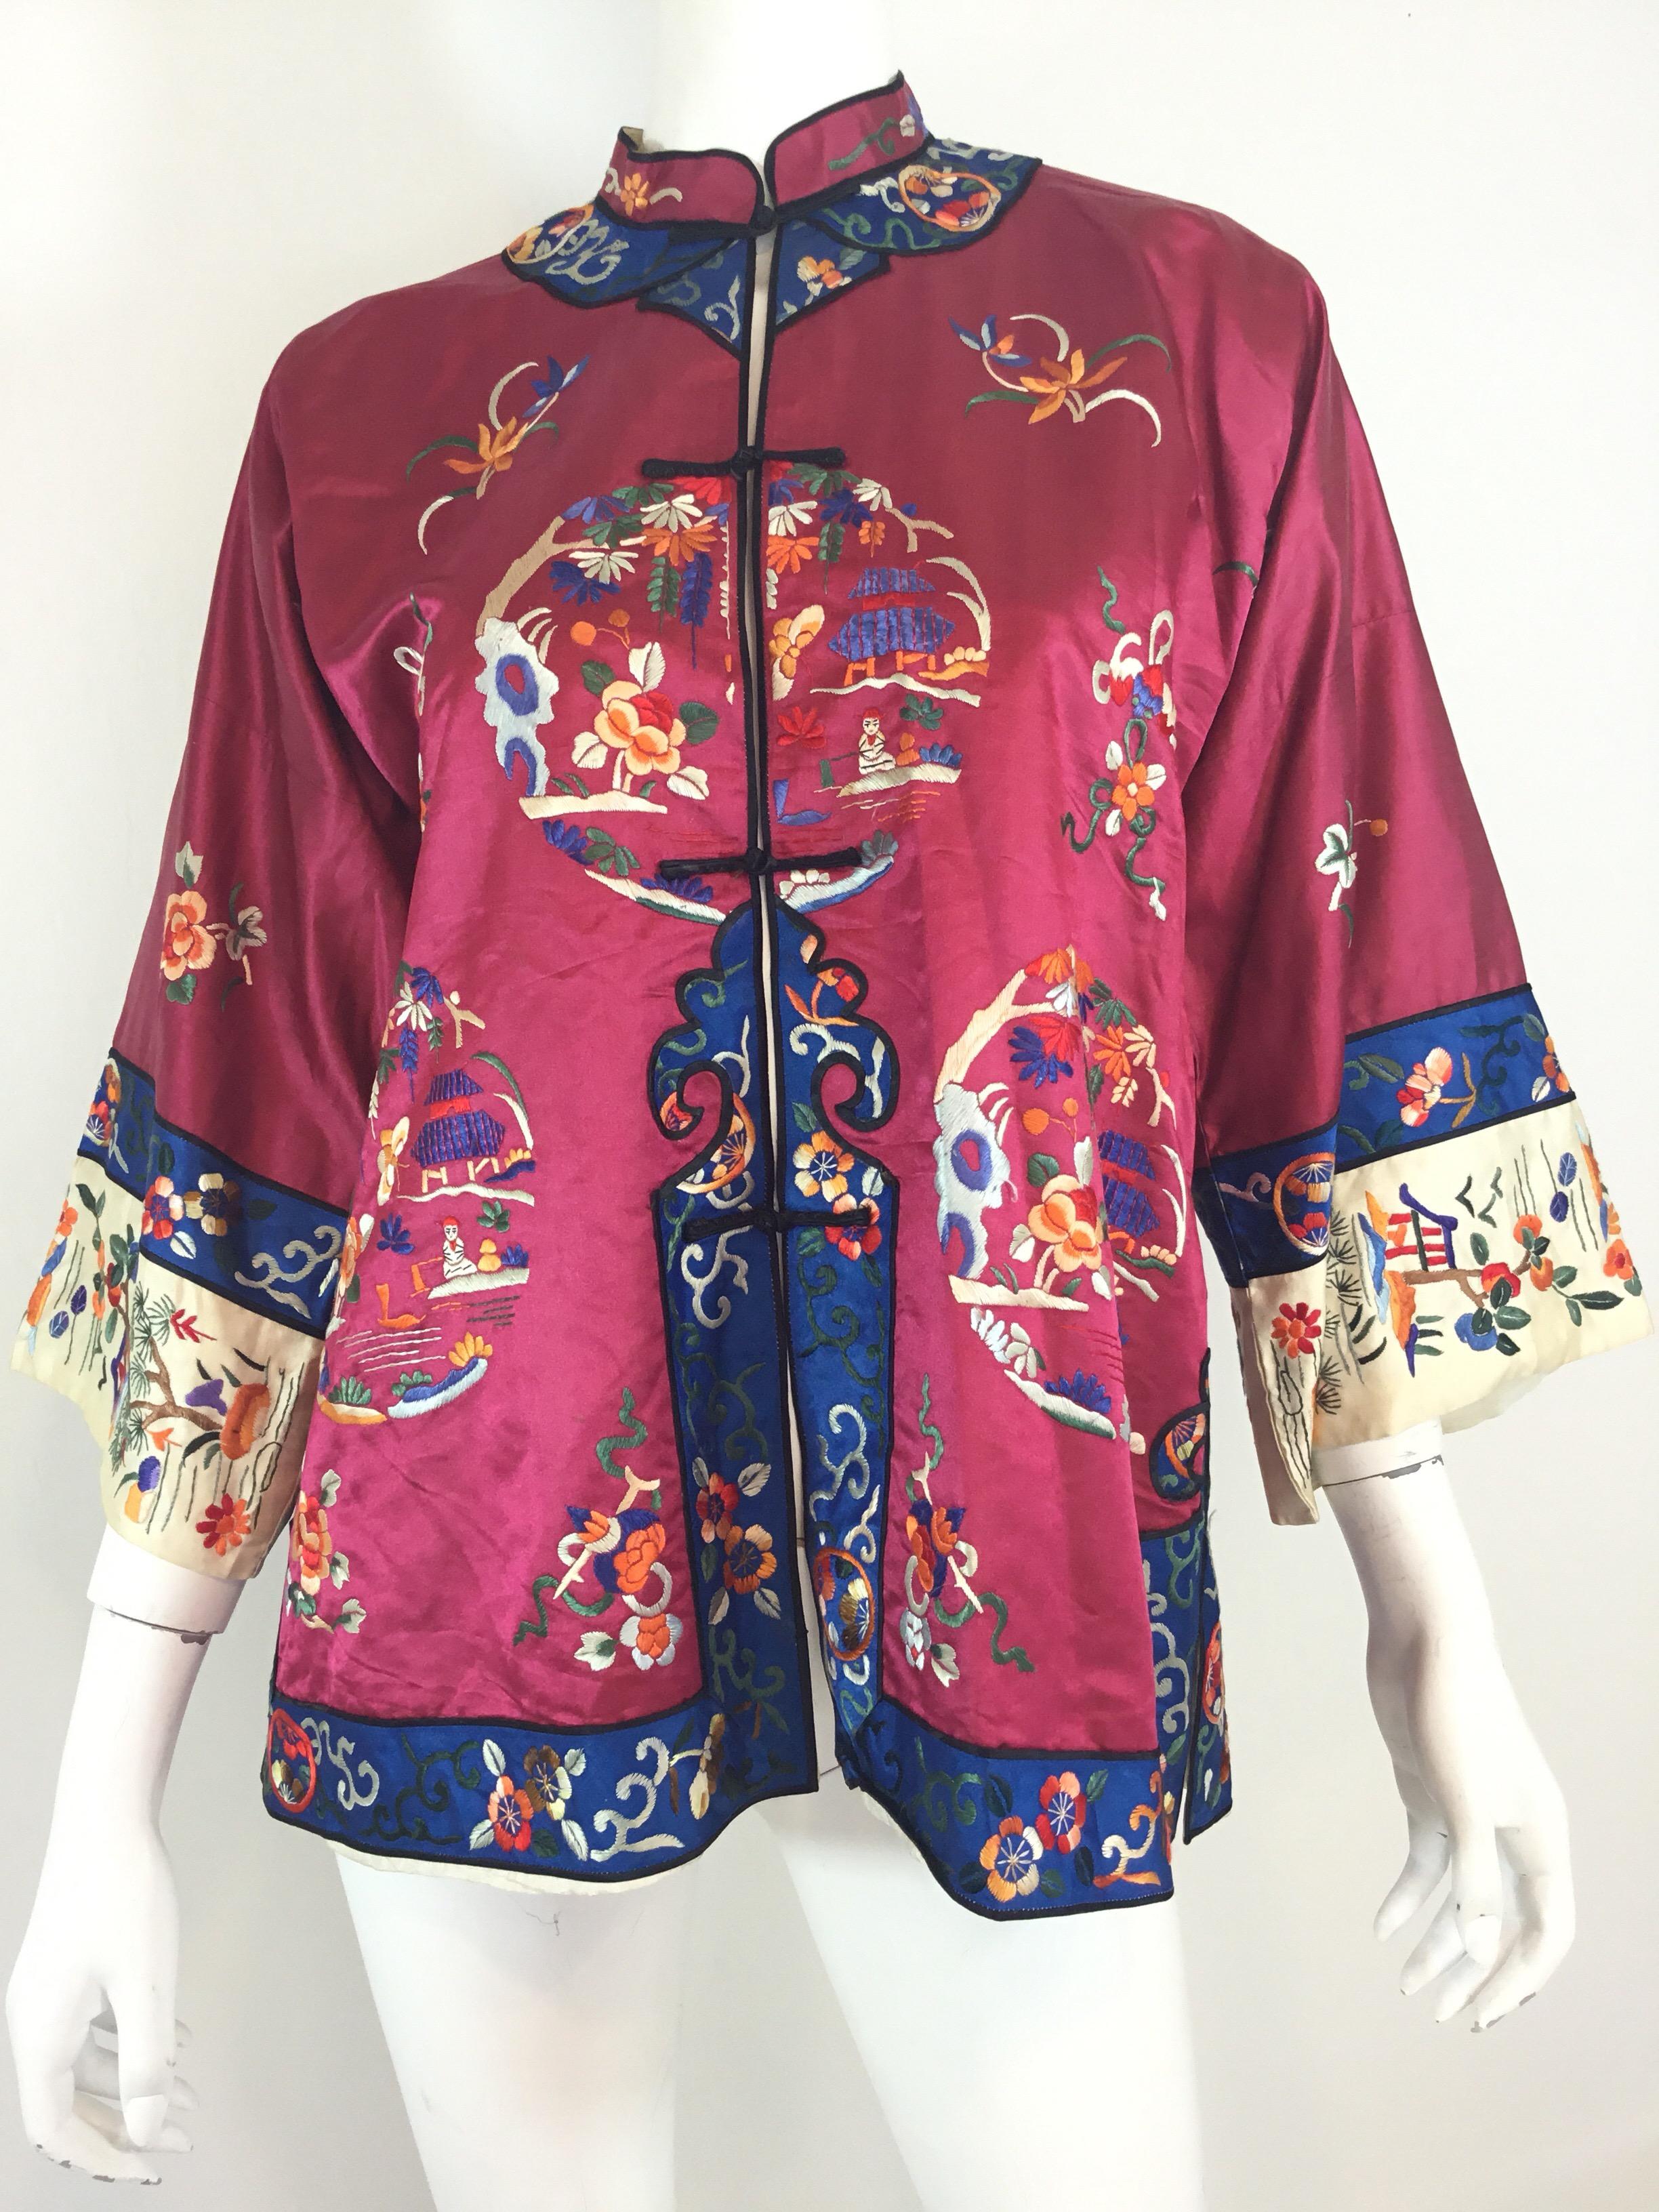 Chinese Silk Jacket, circa 1920 featured in Maroon with multicolor embroidering throughout. Jacket has button fastenings. Measurements are as follows:

Bust 40”, sleeves 12” (dolman style sleeve), length 28”